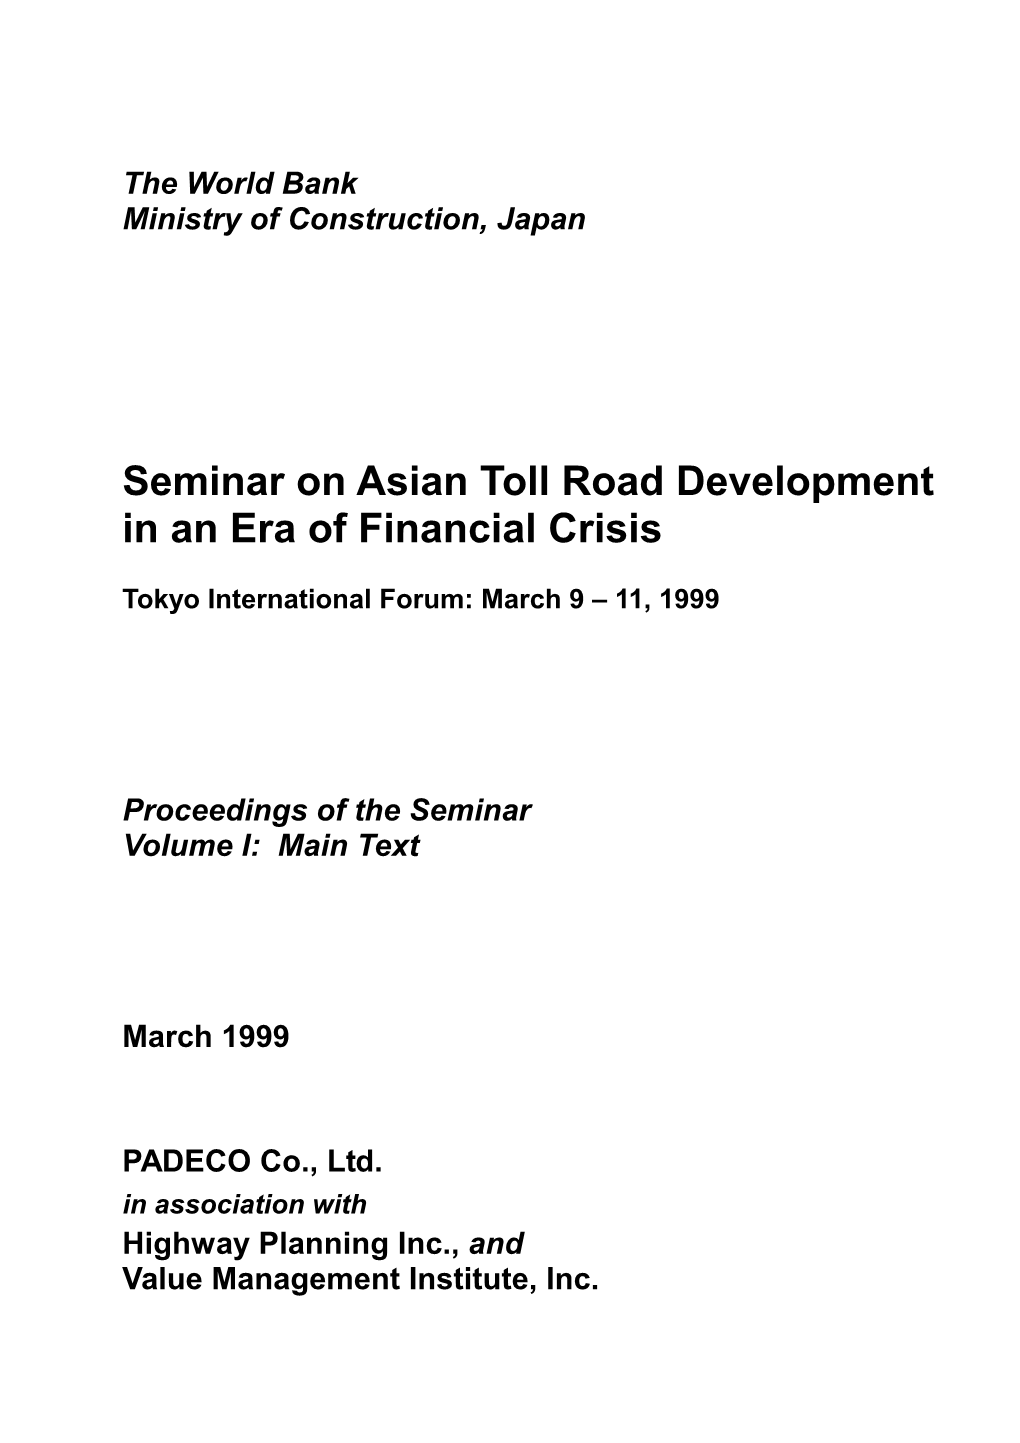 Proceedings of the Seminar on Asian Toll Road Development in an Era Of